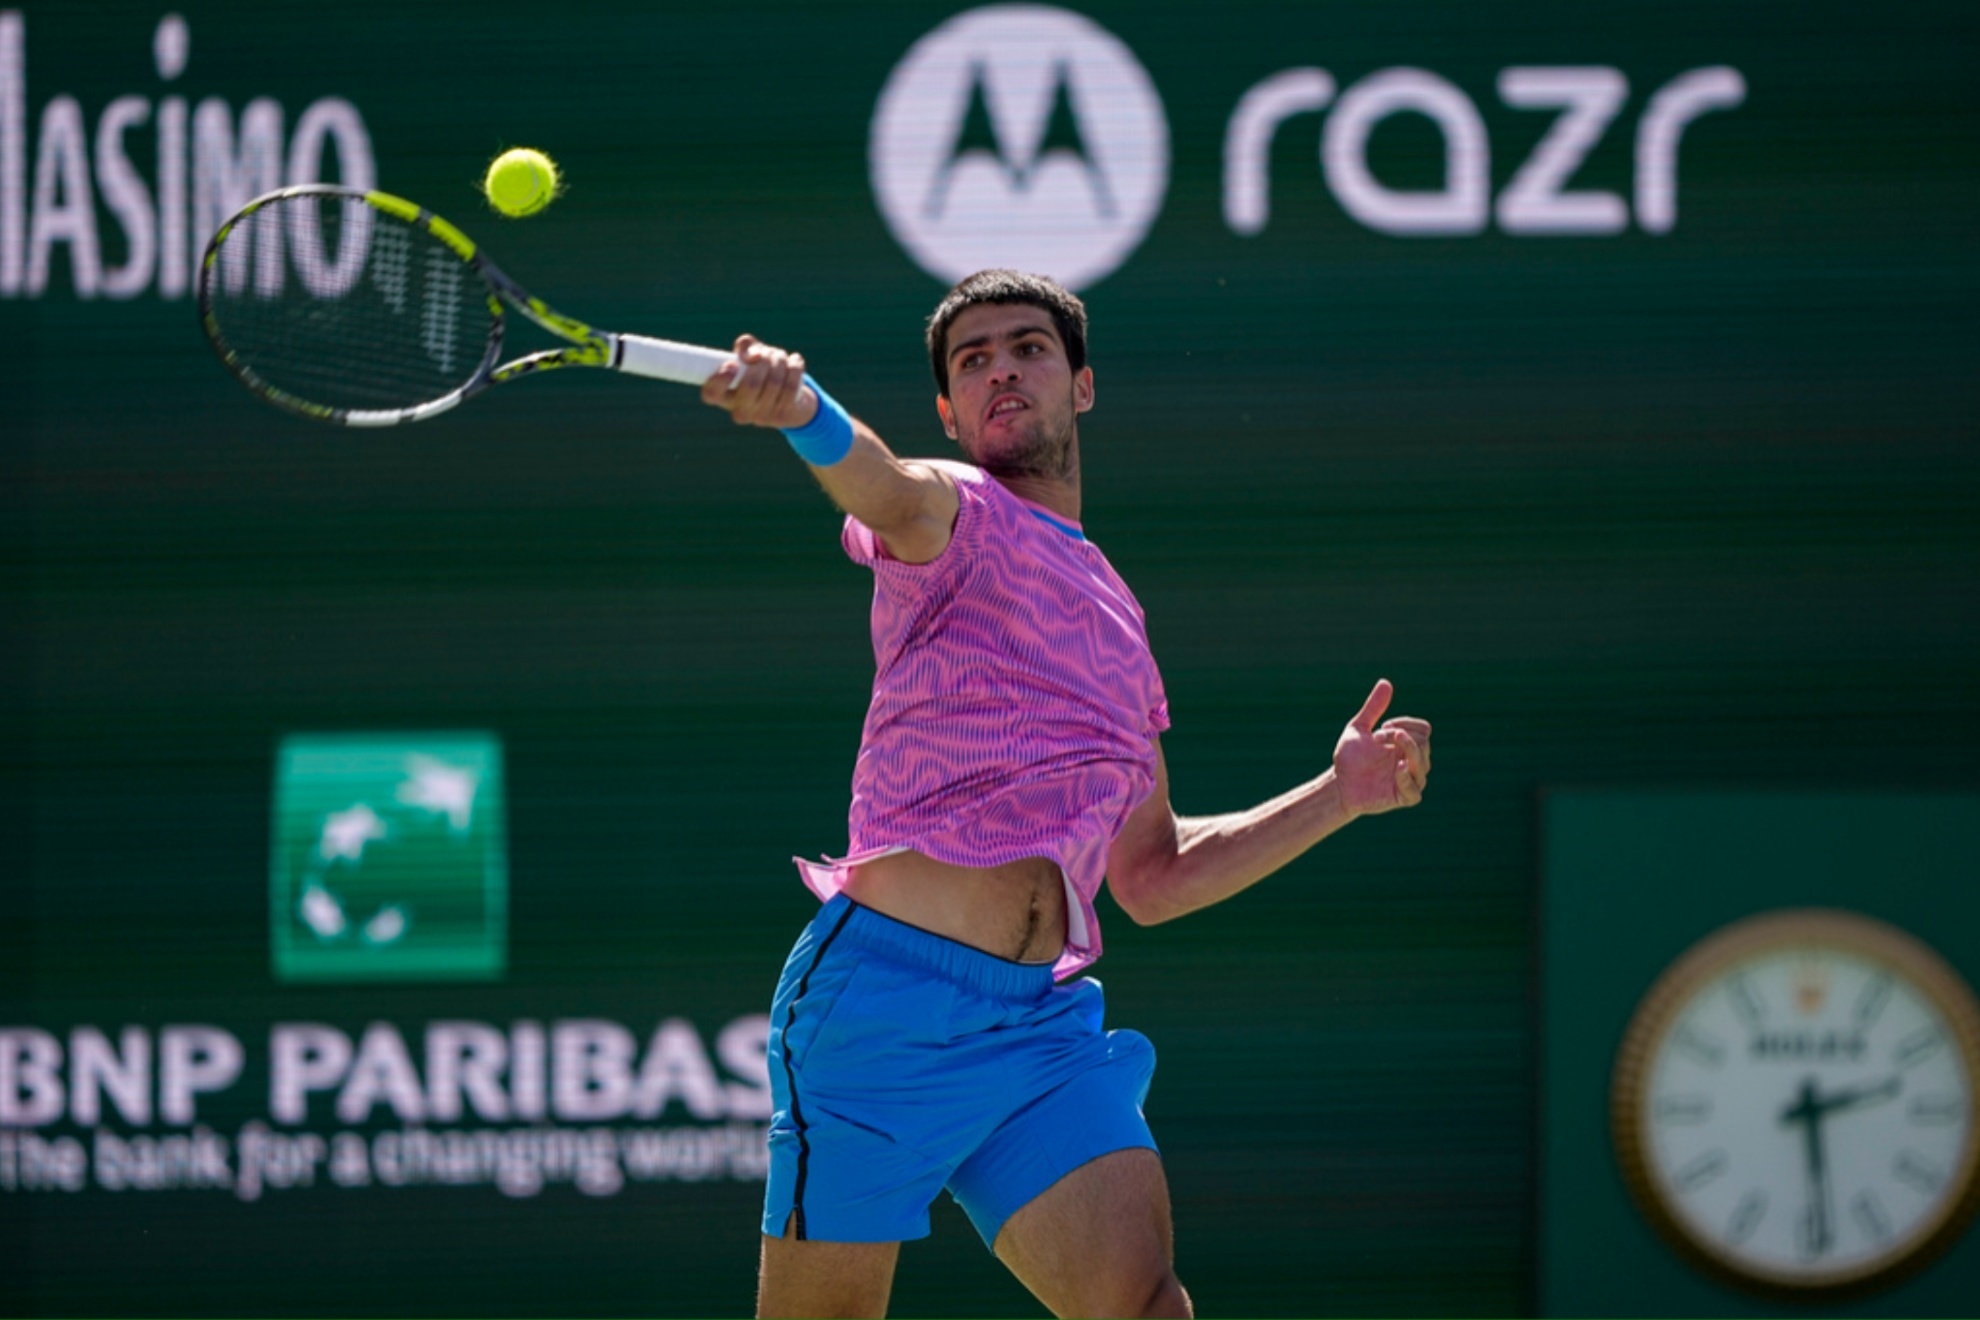 Carlos Alcaraz hits a return to Fabian Marozsan during their match at Indian Wells.